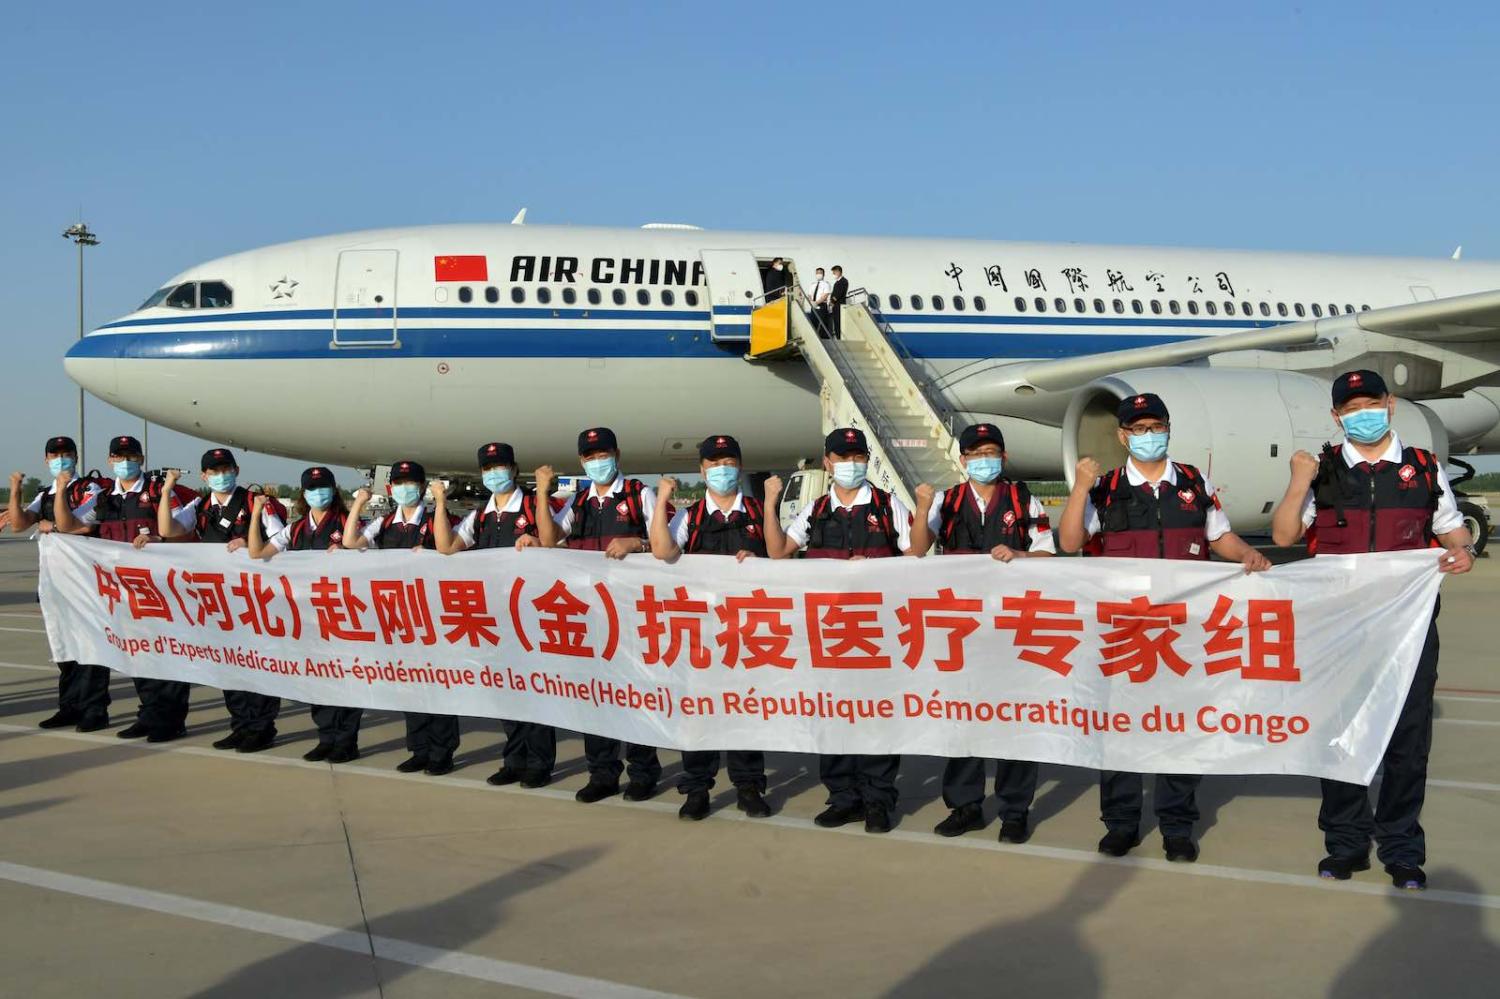 A team of anti-epidemic medical experts departing for the Democratic Republic of the Congo, Shijiazhuang, Hebei Province of China, 11 May 2020 (Zhai Yujia/China News Service via Getty Images)